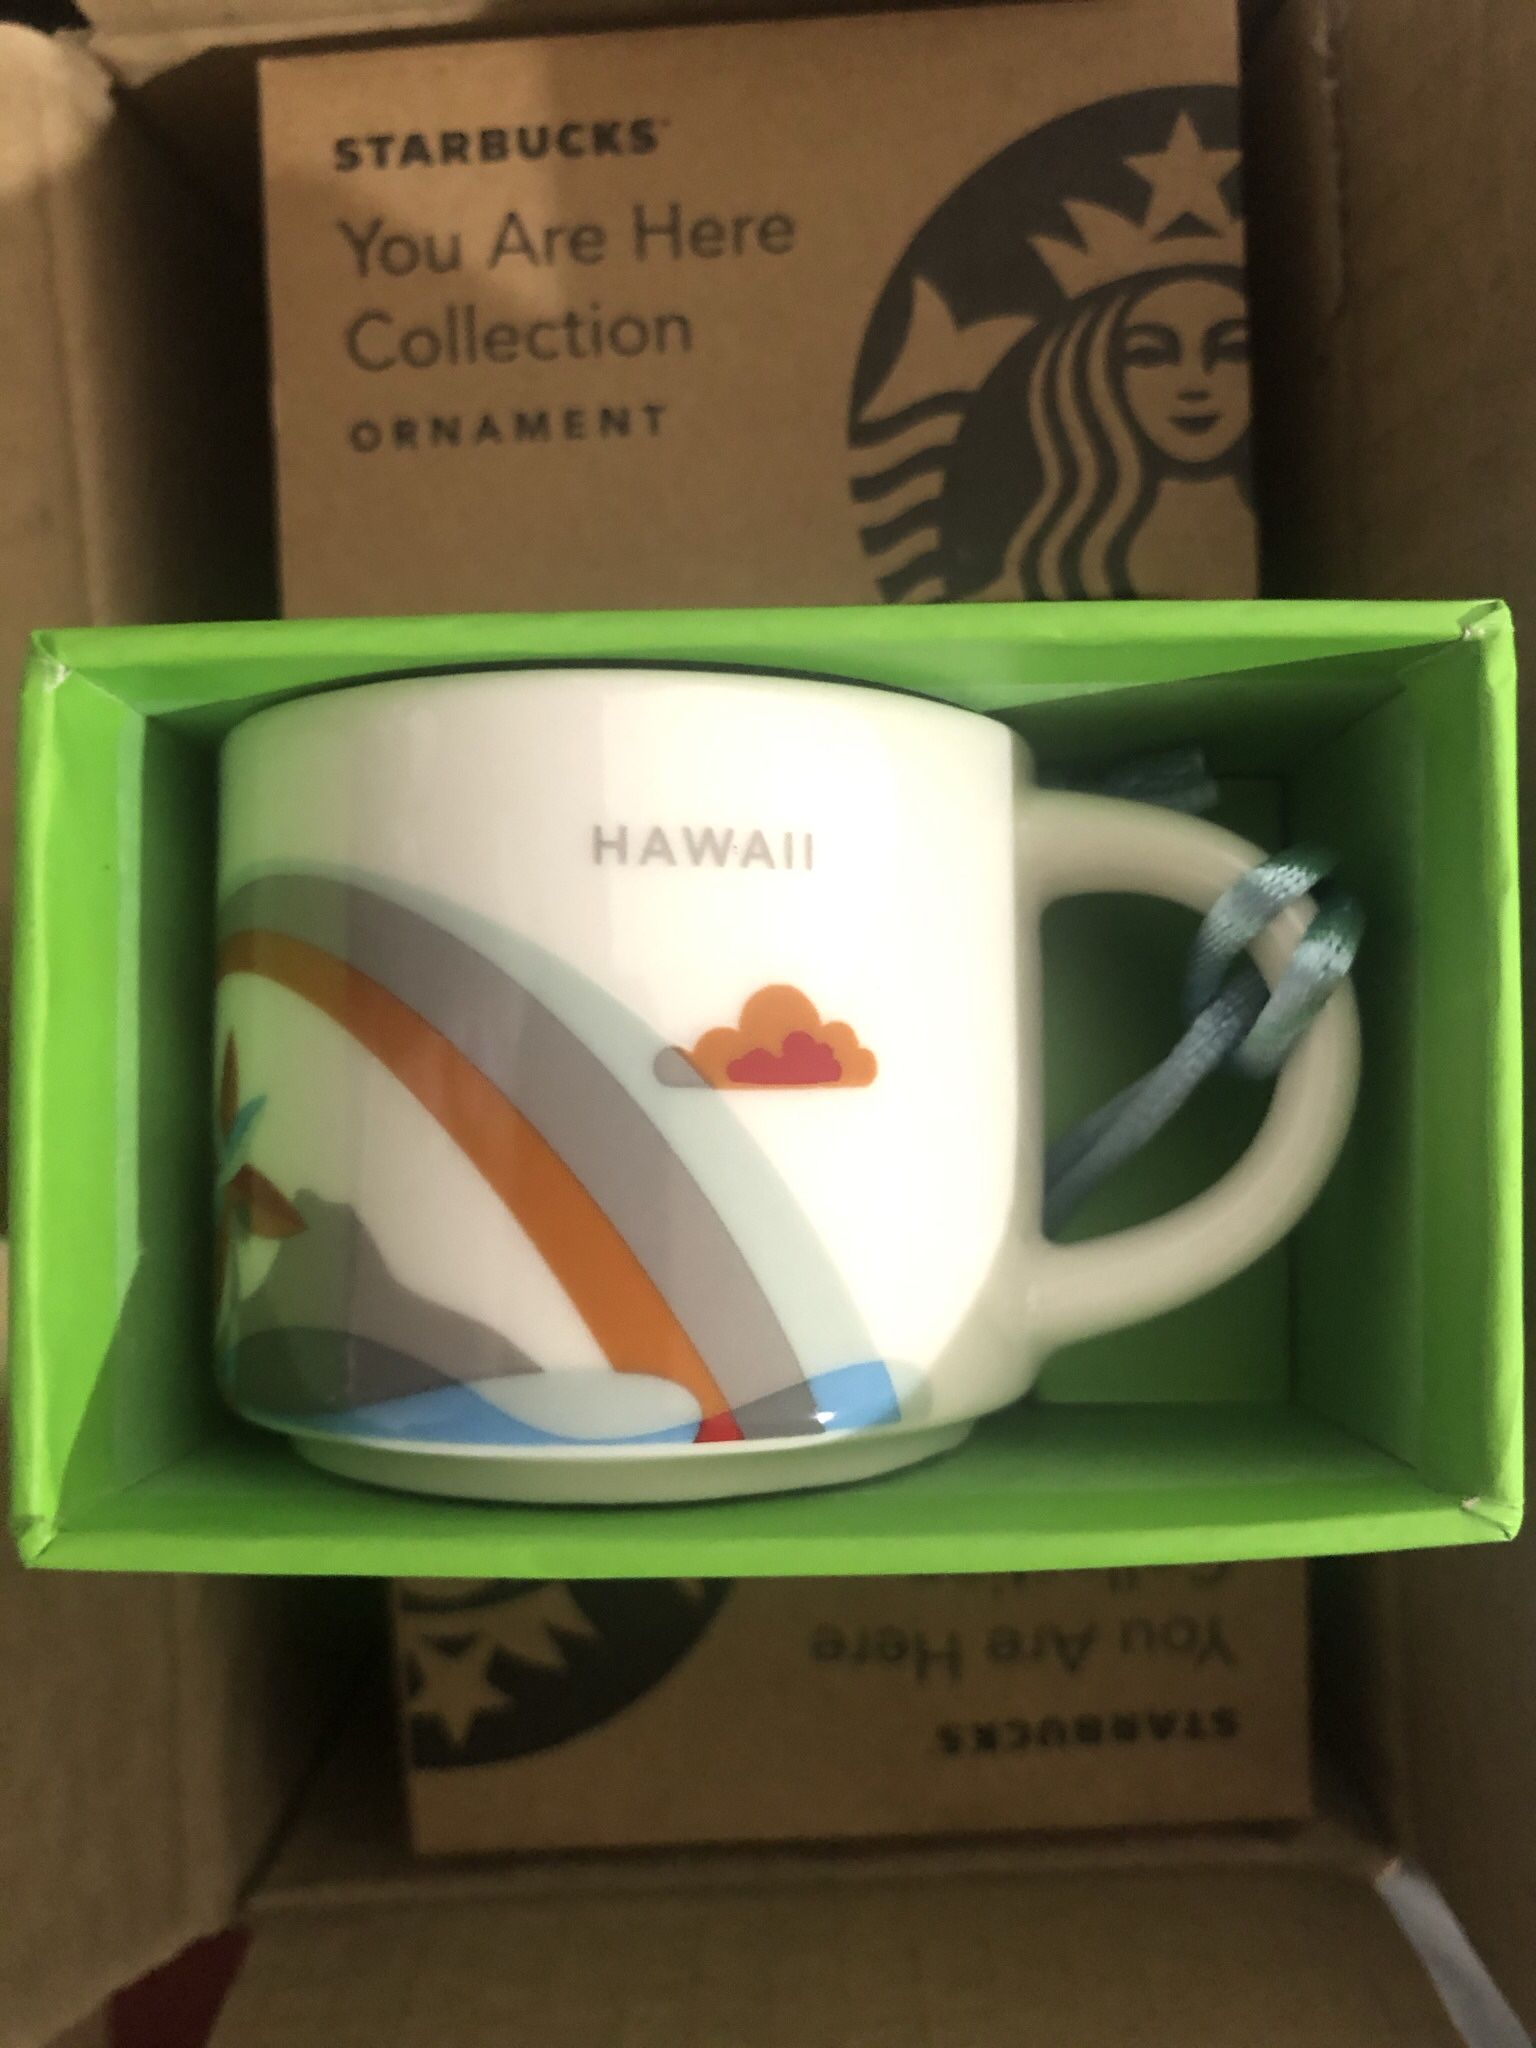 Starbucks Hawaii You Are Here Ornament